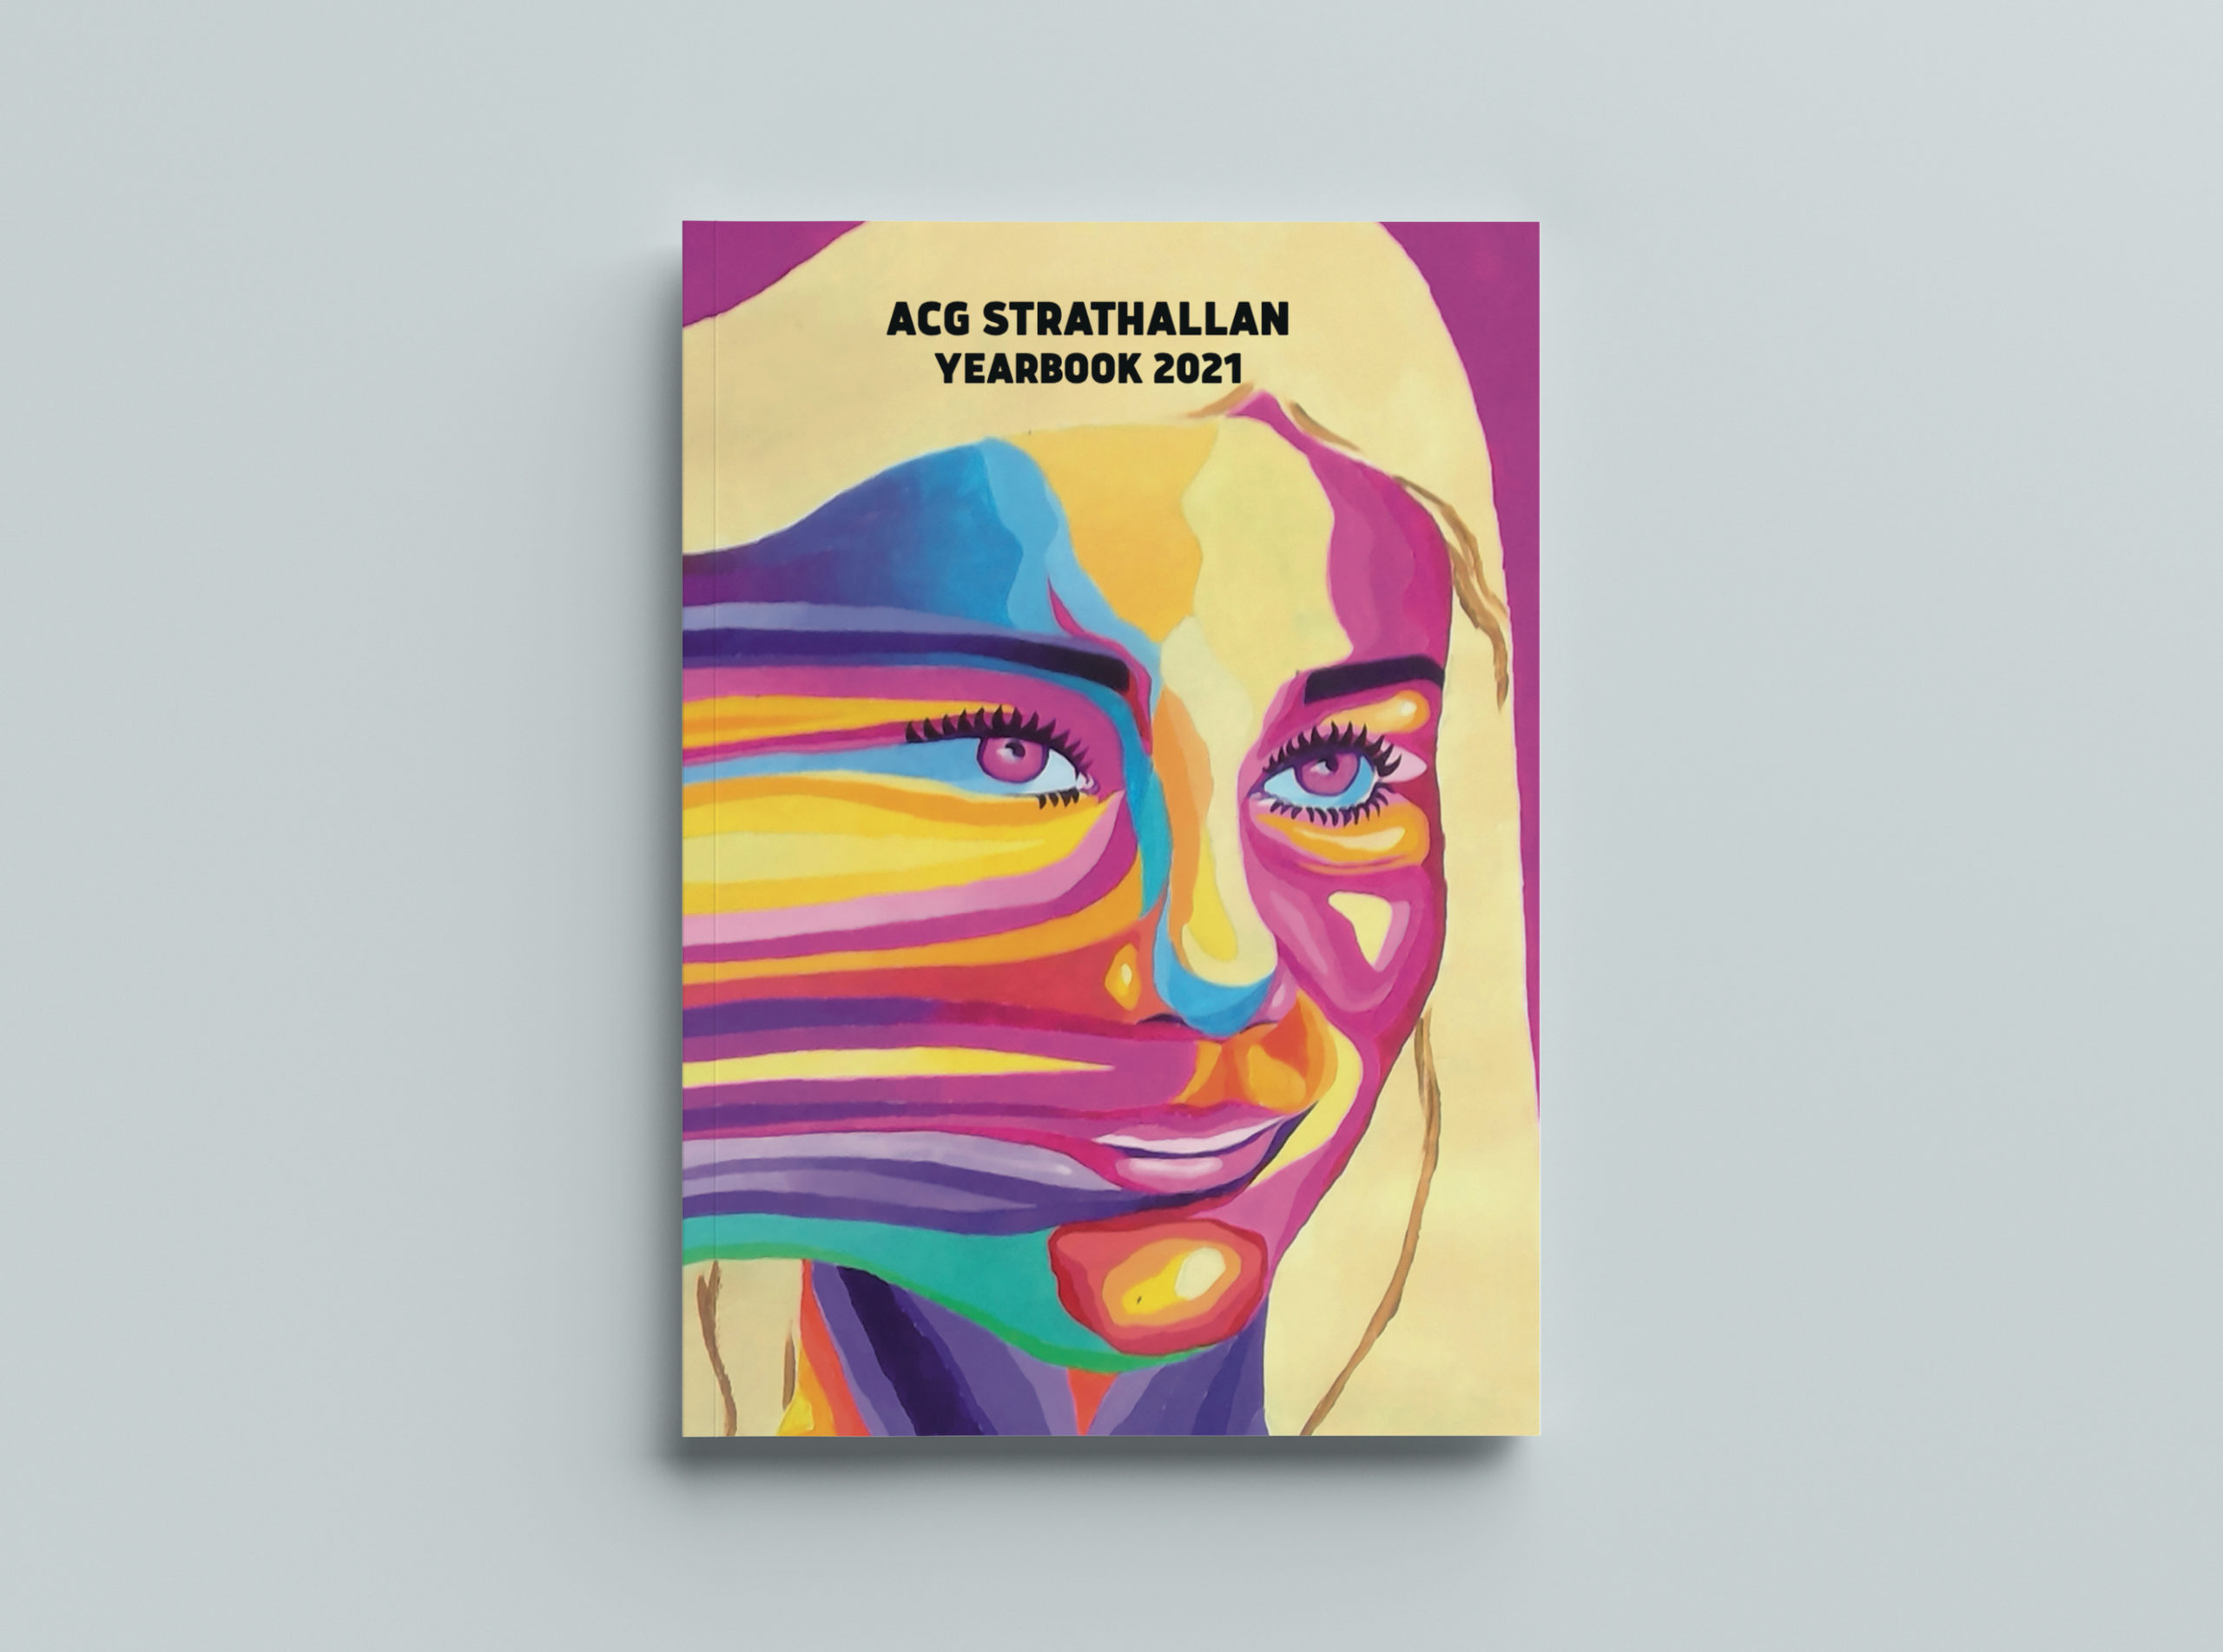 ACG Strathallan 2021 Yearbook cover